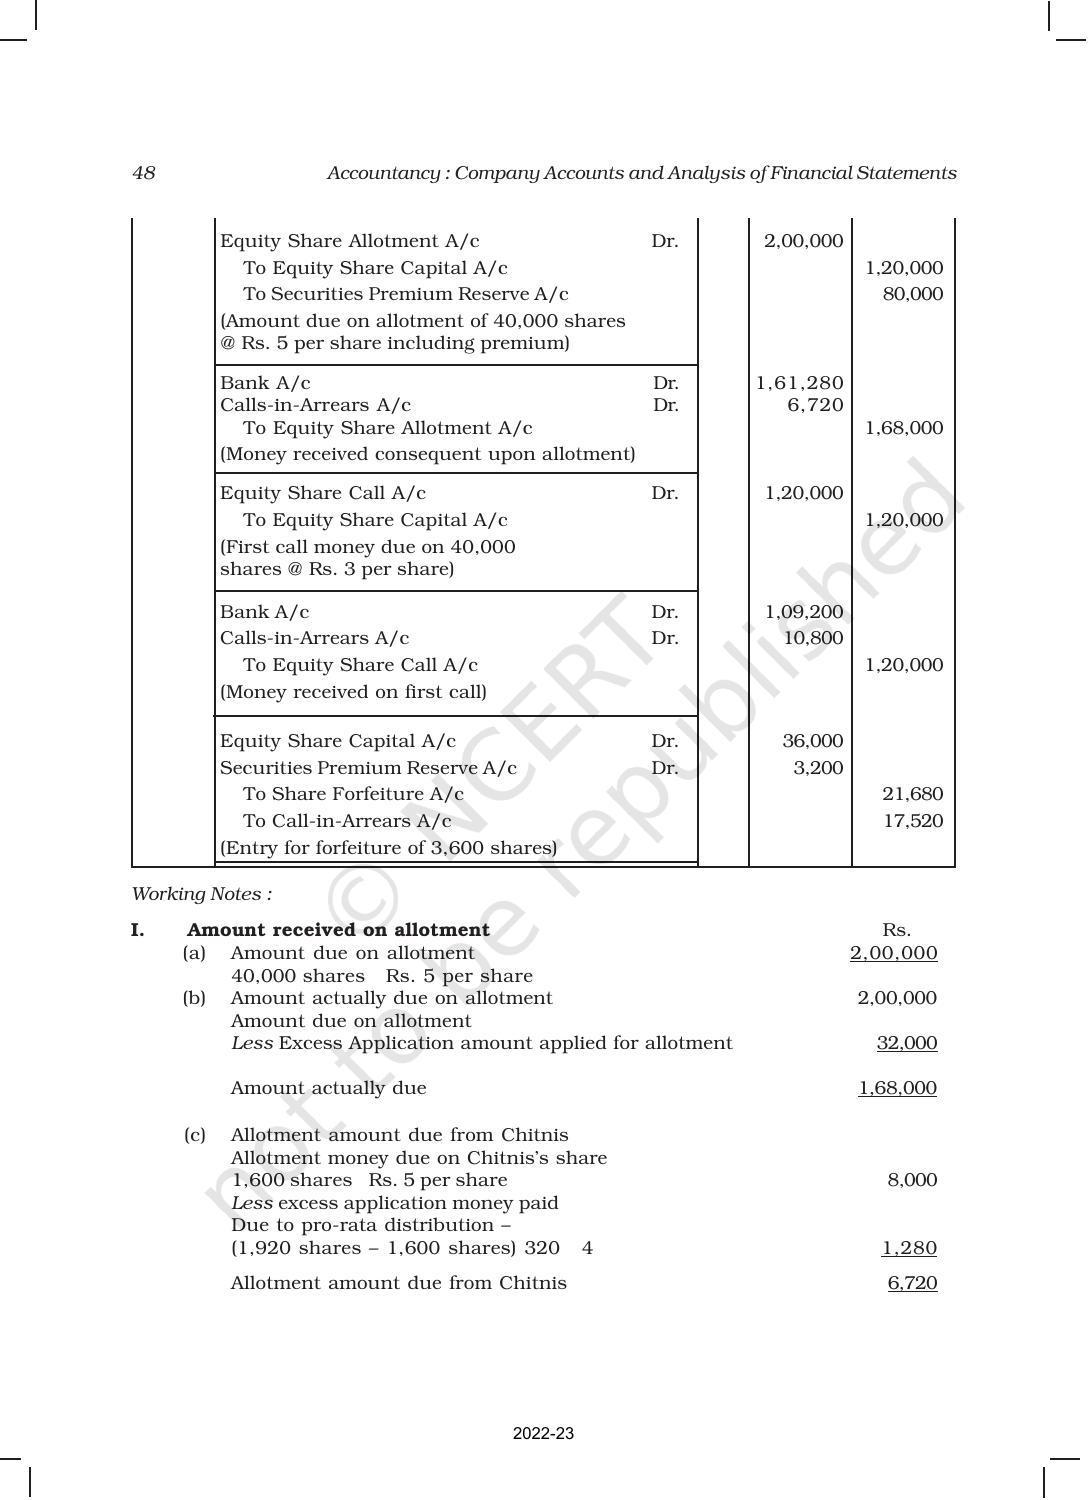 NCERT Book for Class 12 Accountancy Part II Chapter 1 Accounting for Share Capital - Page 48